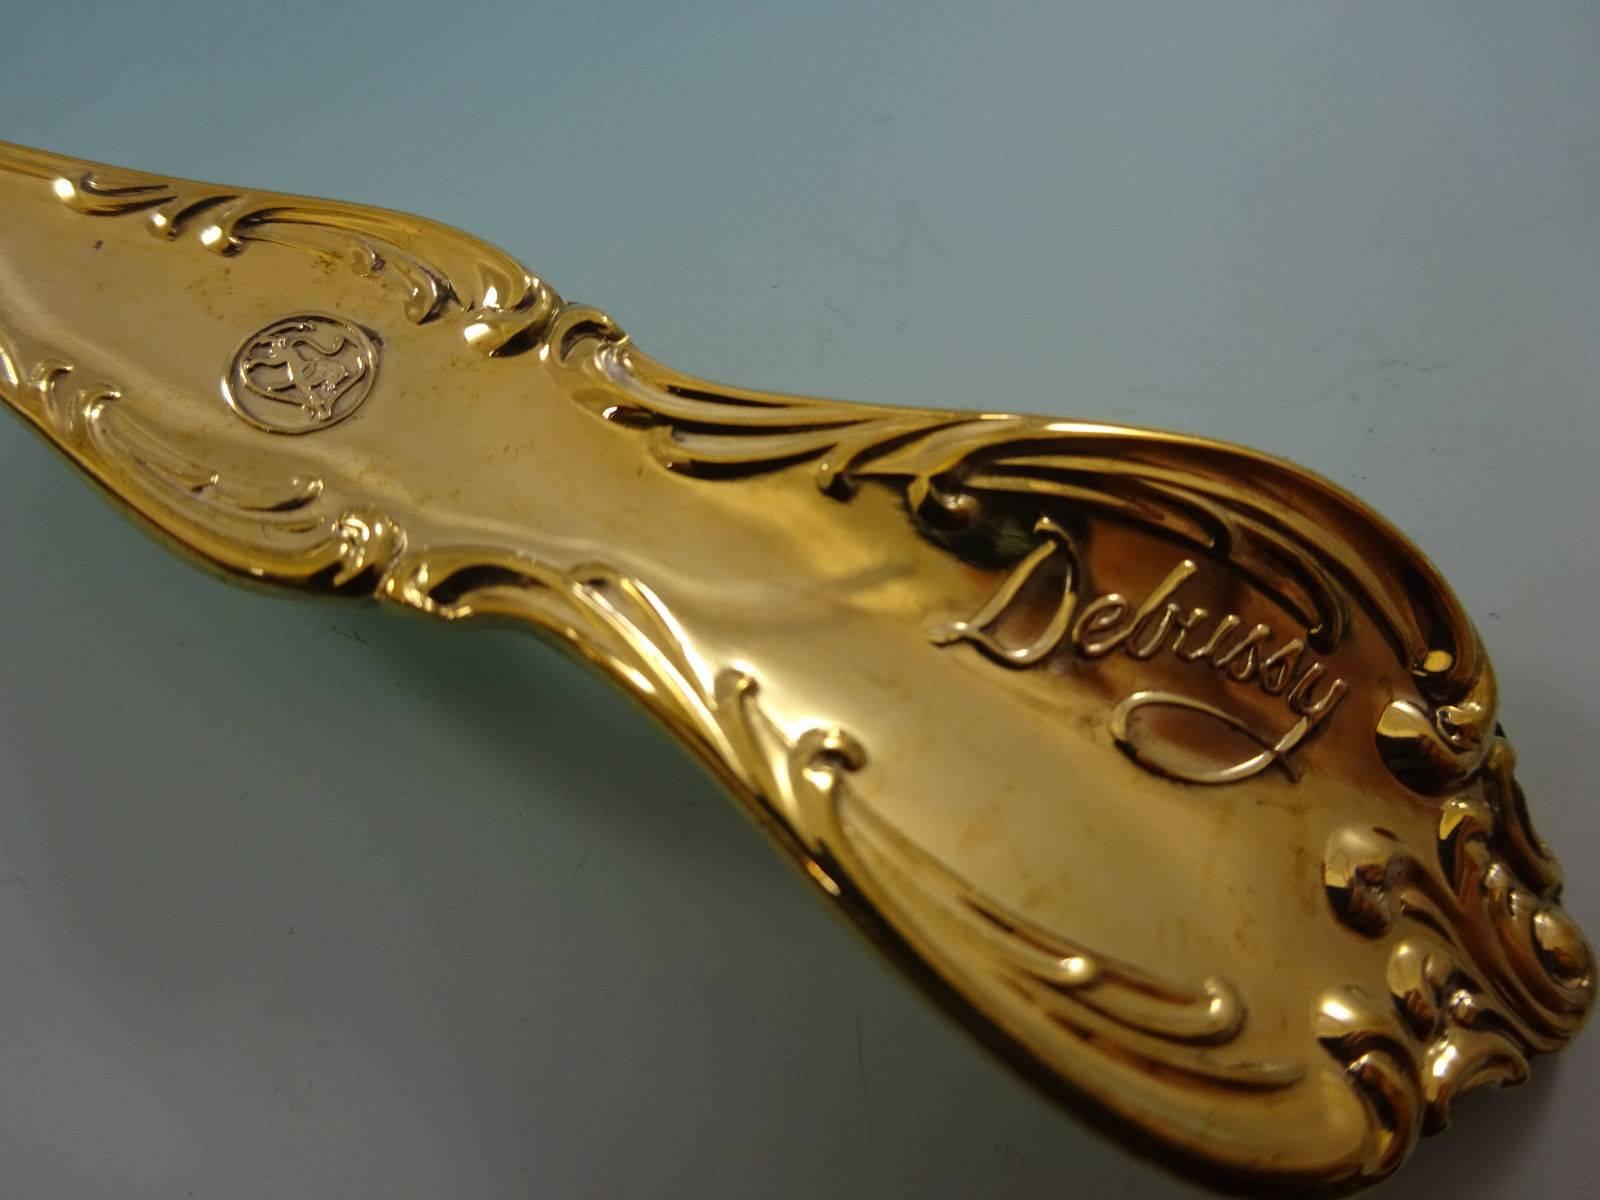 Debussy by Towle Sterling Silver Flatware Service for 12, Set in Vermeil Gold In Excellent Condition For Sale In Big Bend, WI